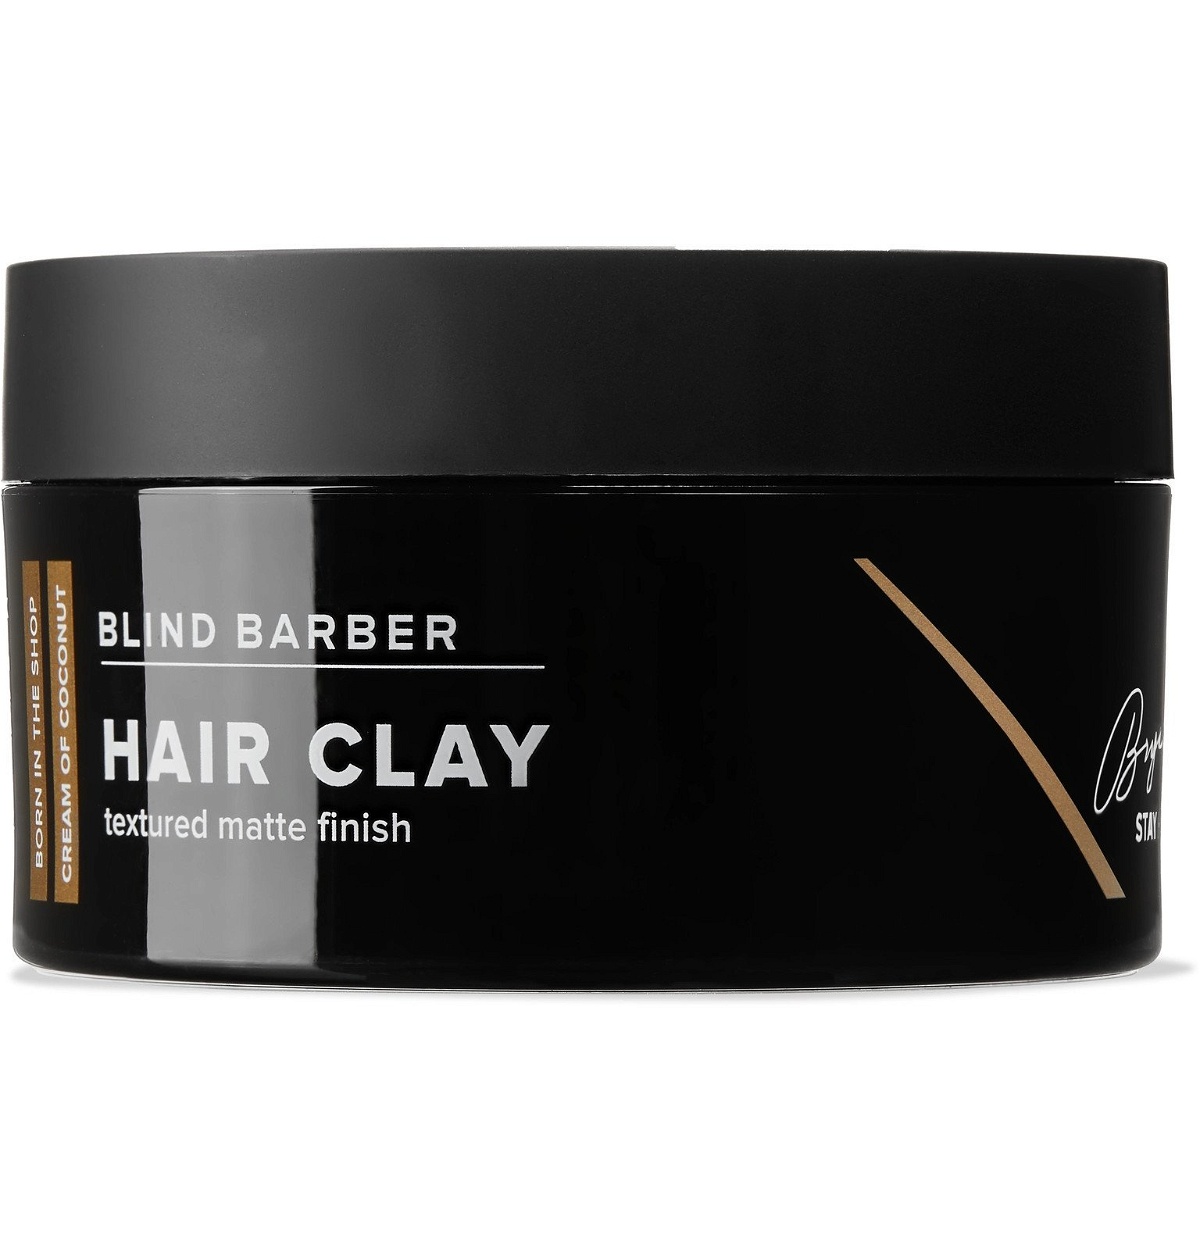 Blind Barber - Bryce Harper Hair Clay, 70g - Colorless